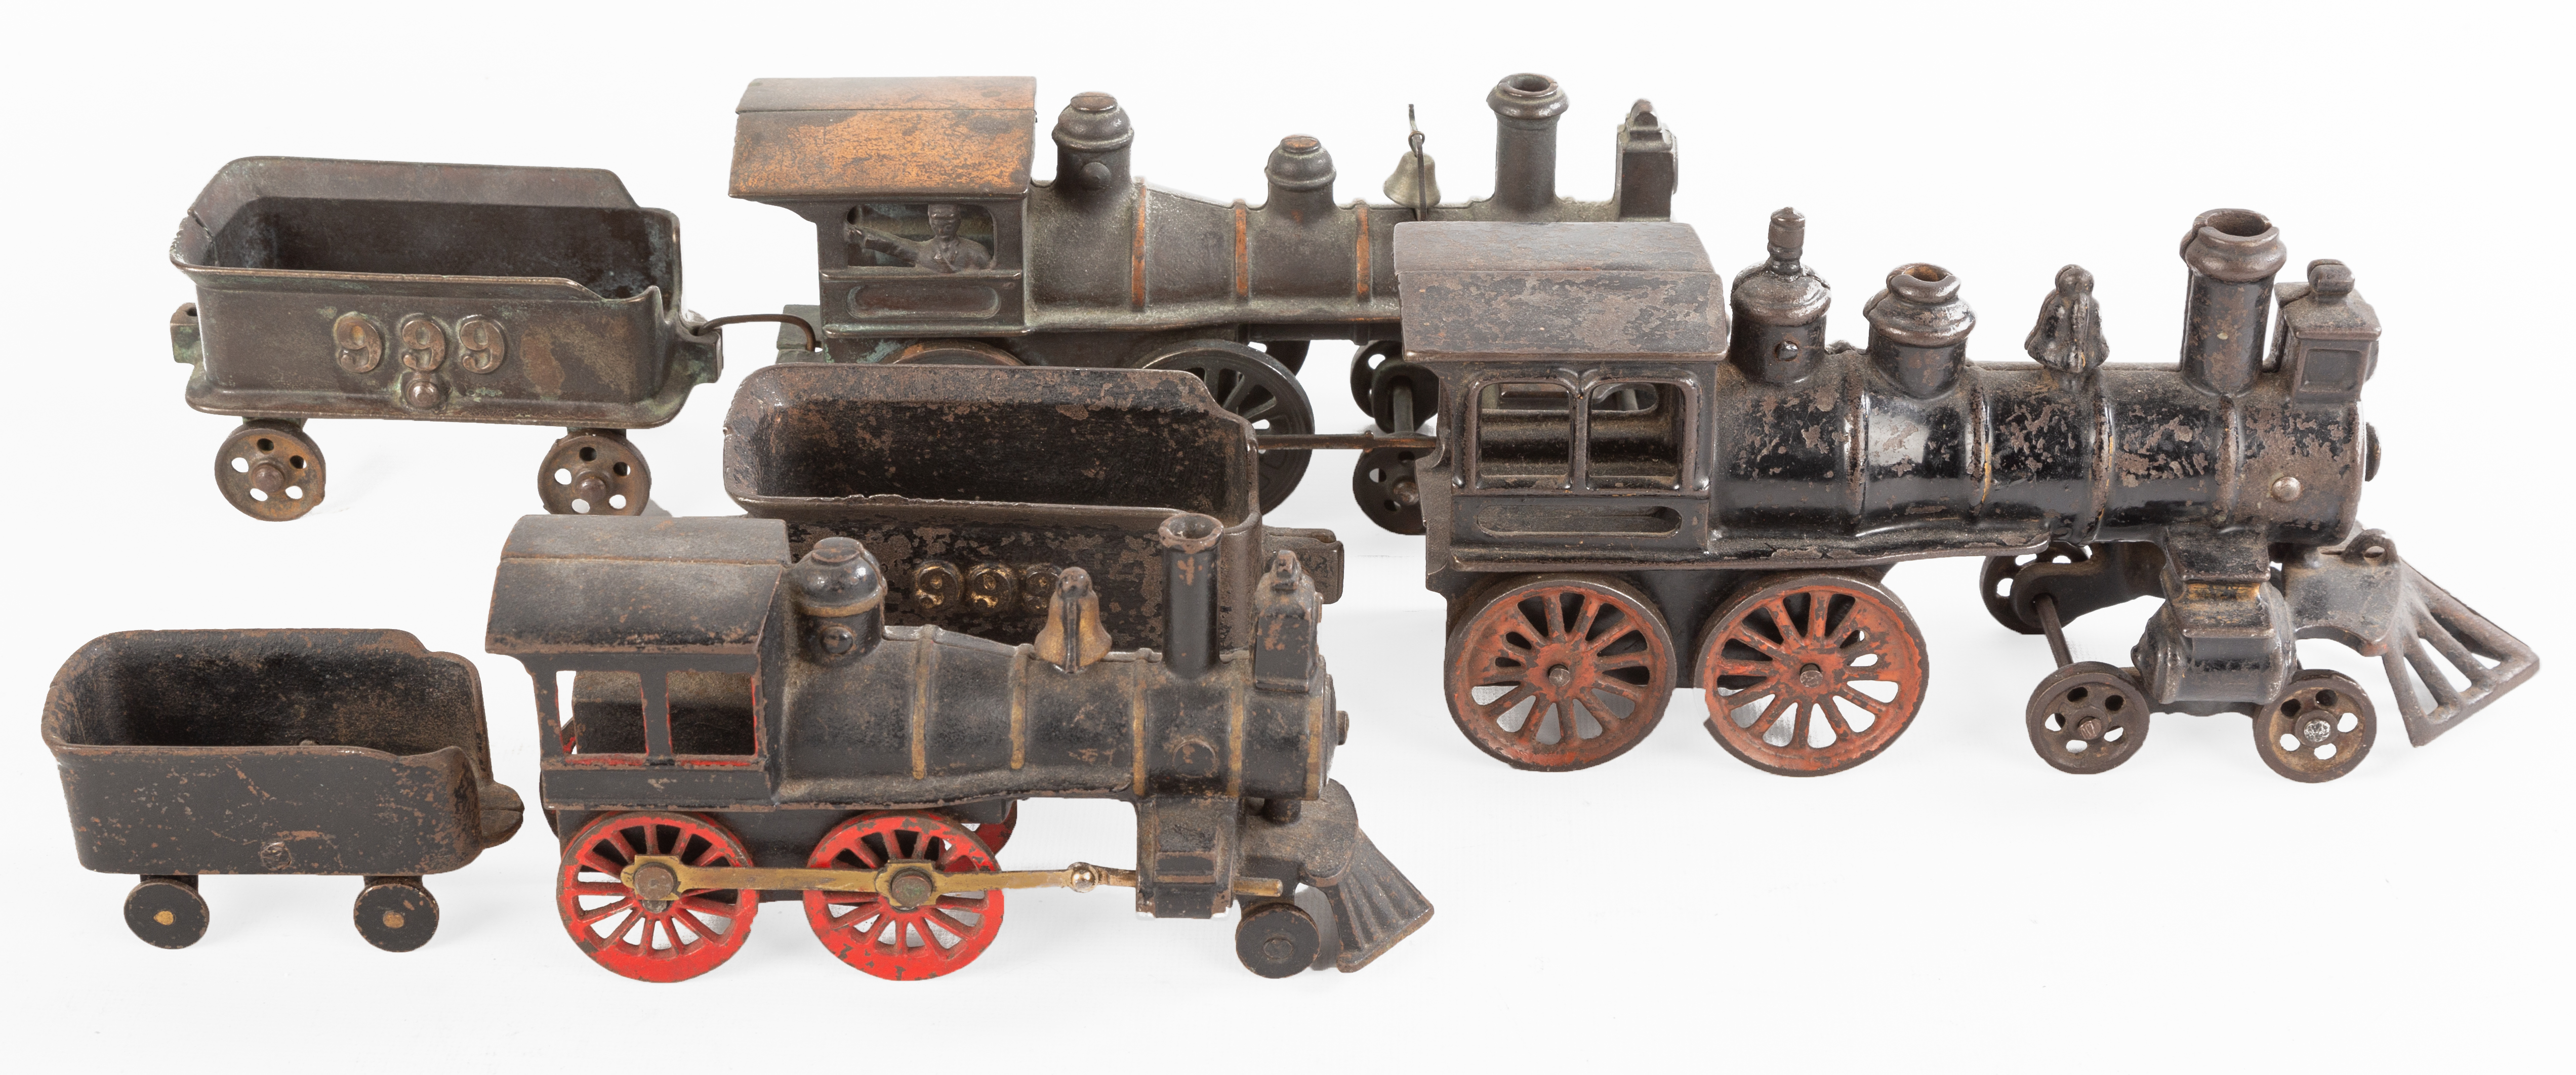 CAST IRON TOY TRAINS Late 19th